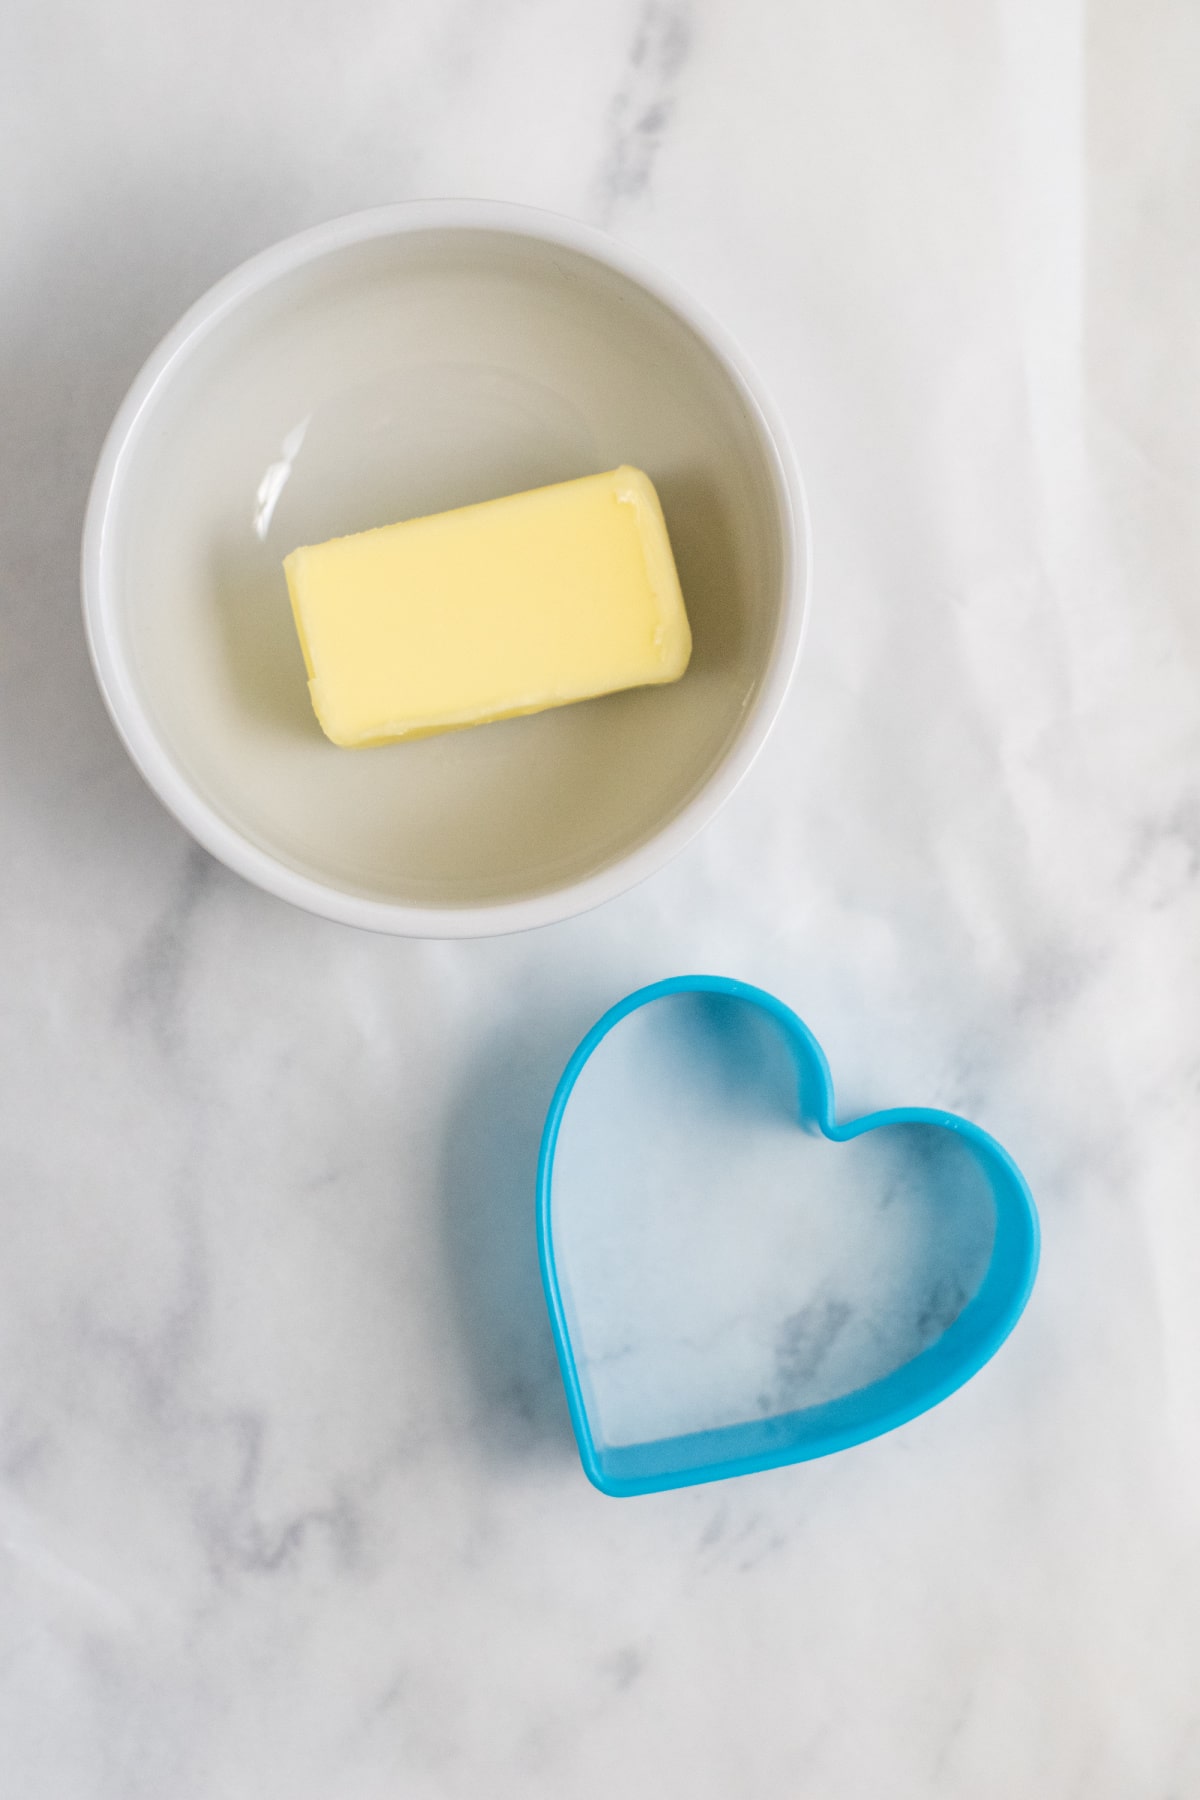 Butter in bowl with a heart shaped cookie cutter